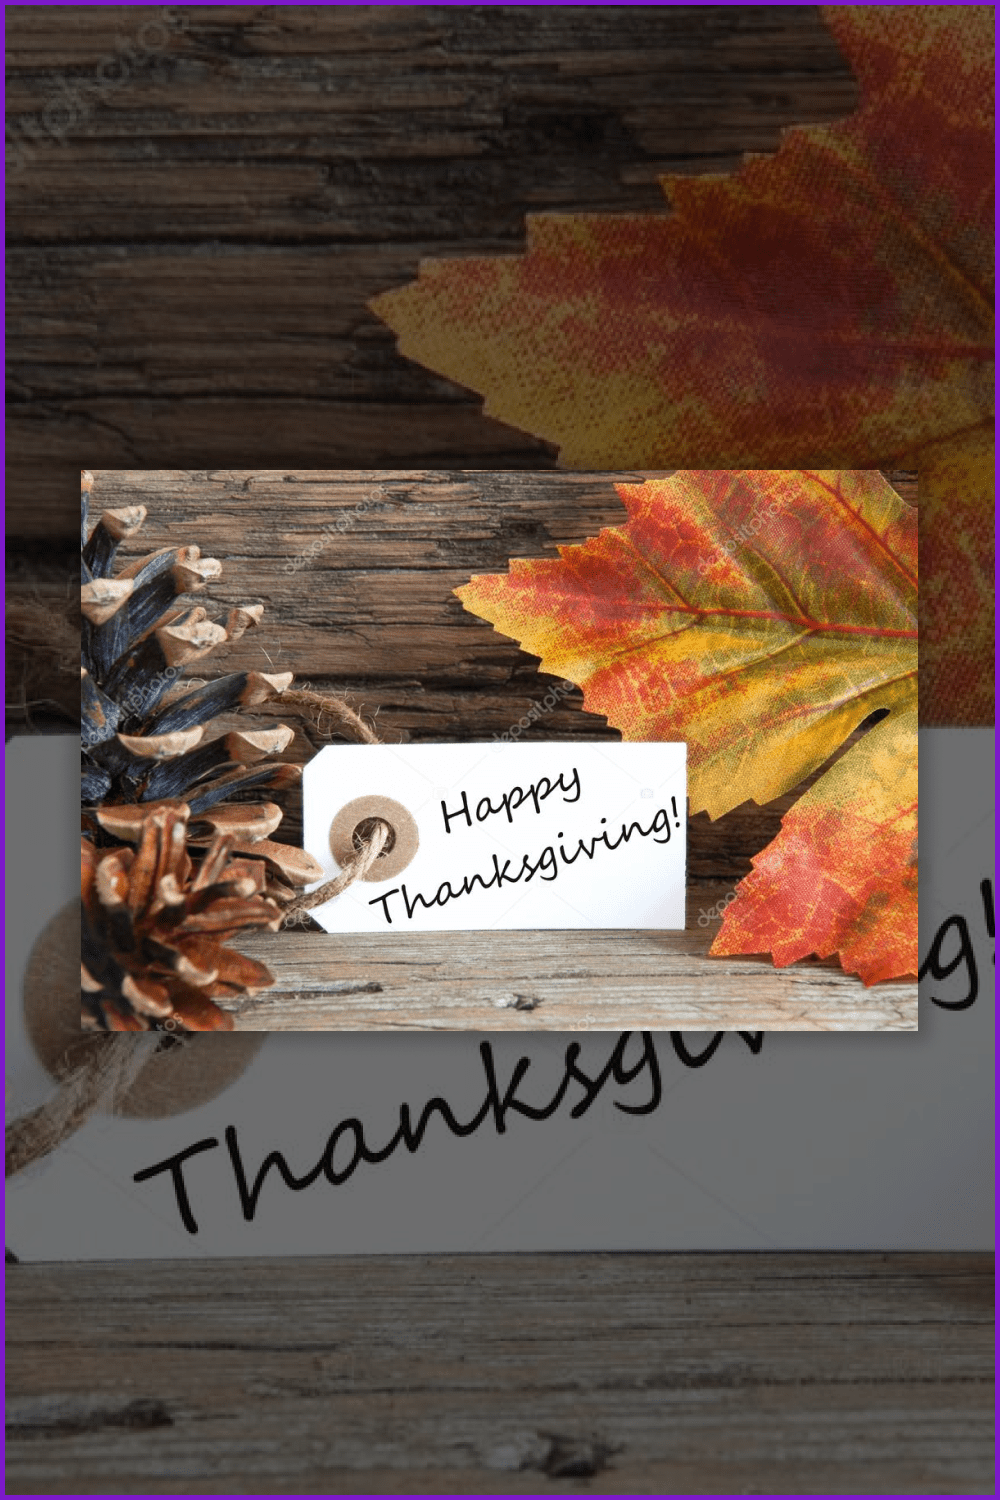 Yellow maple leaf, fir cone and label with inscription Happy Thanksgiving.